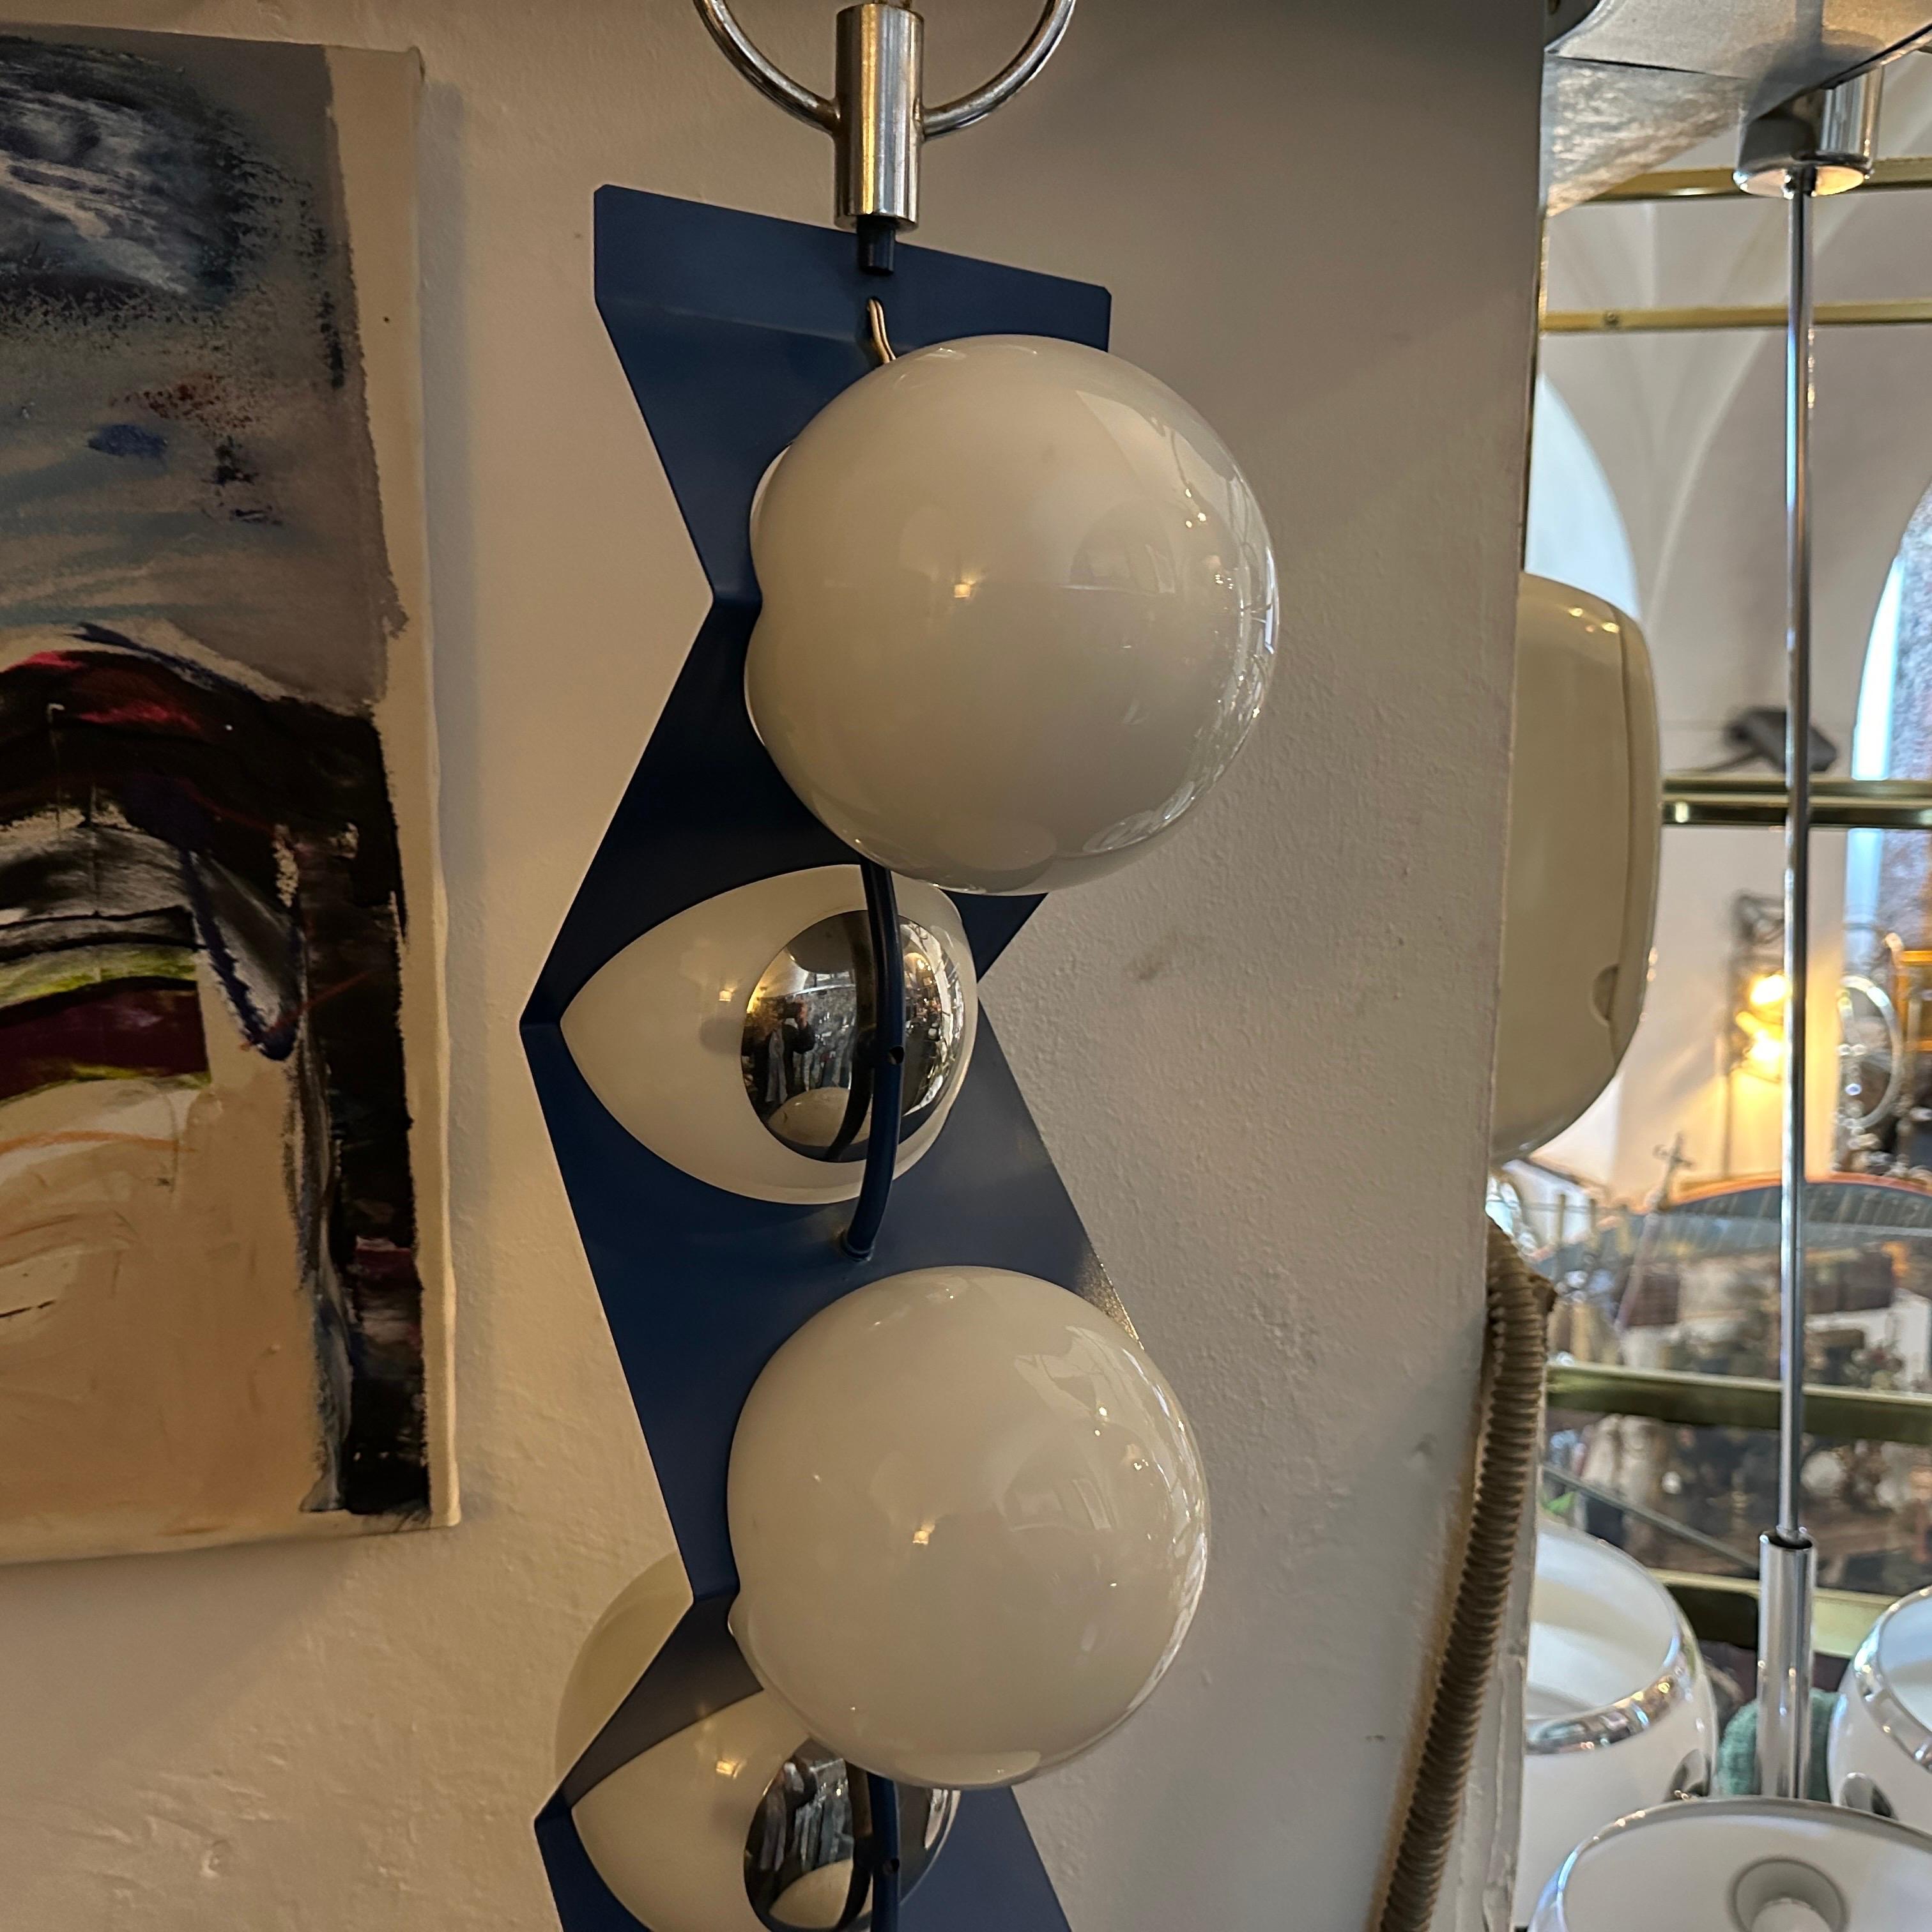 A particular light pendant designed and manufactured in Italy in the Seventies, it's in good condition overall, only a glass has a small flaw covered by the metal part when it's mounted.
The blue hue is vibrant and eye-catching, adding a pop of